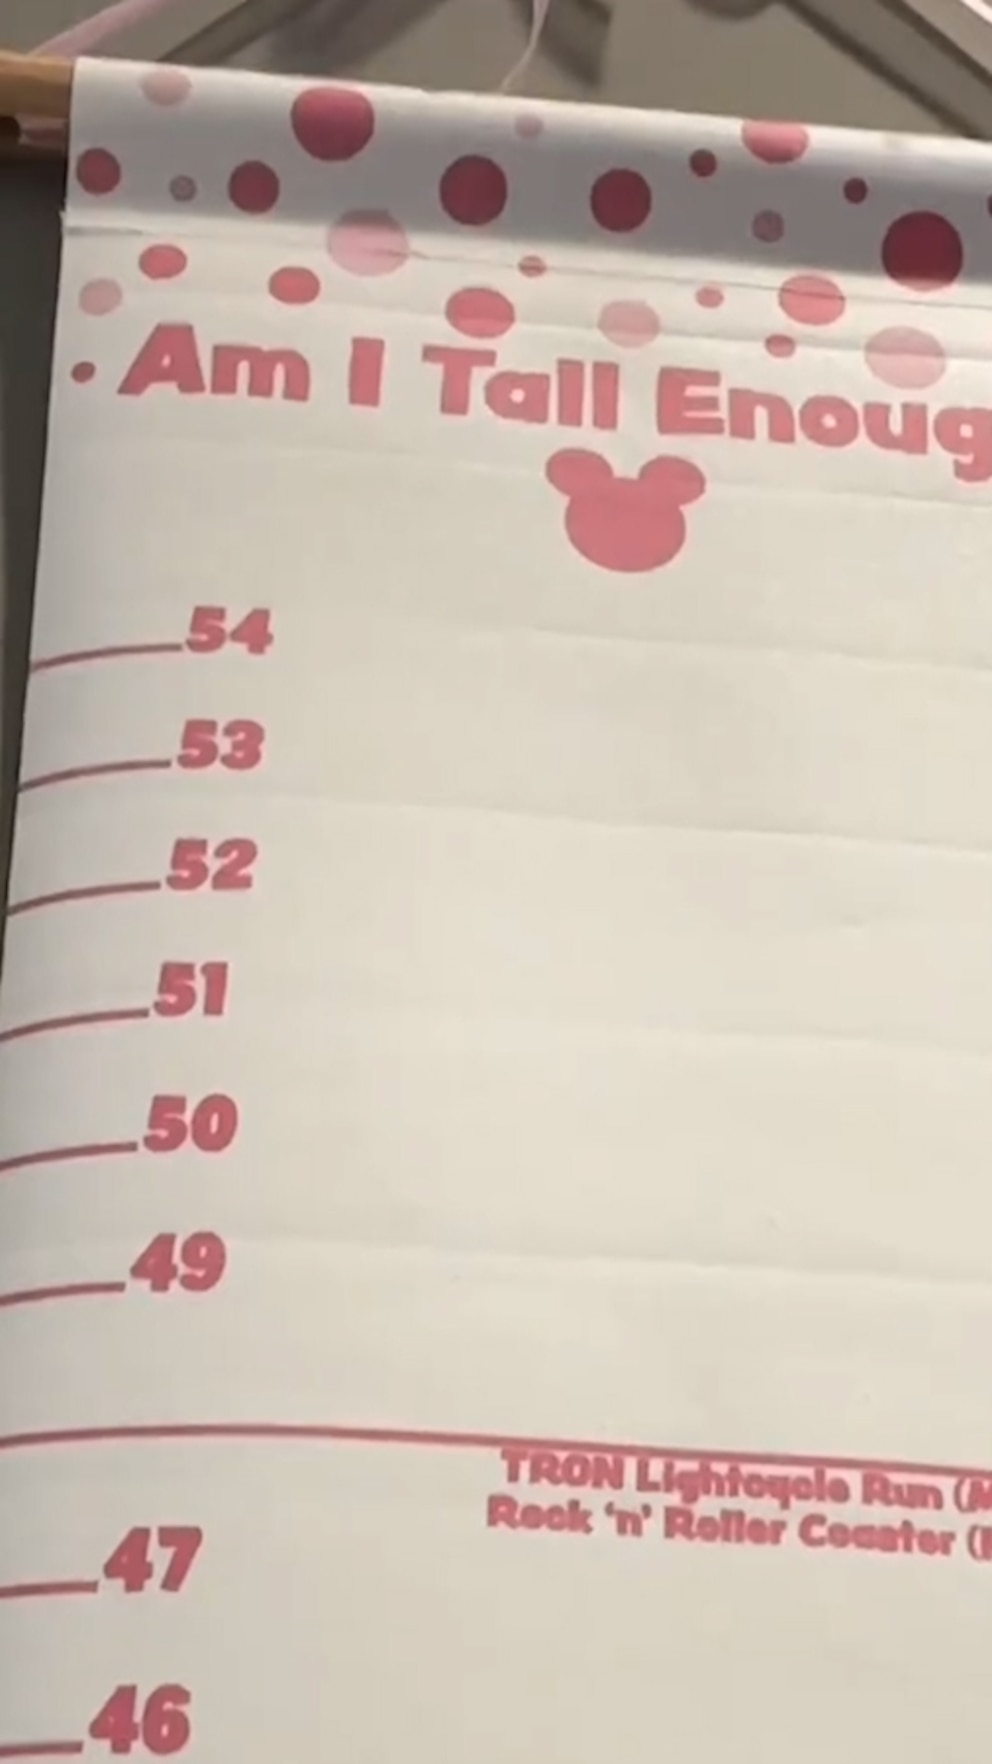 WATCH: Mom makes Disney height chart to mark daughter's growth by which rides she can ride